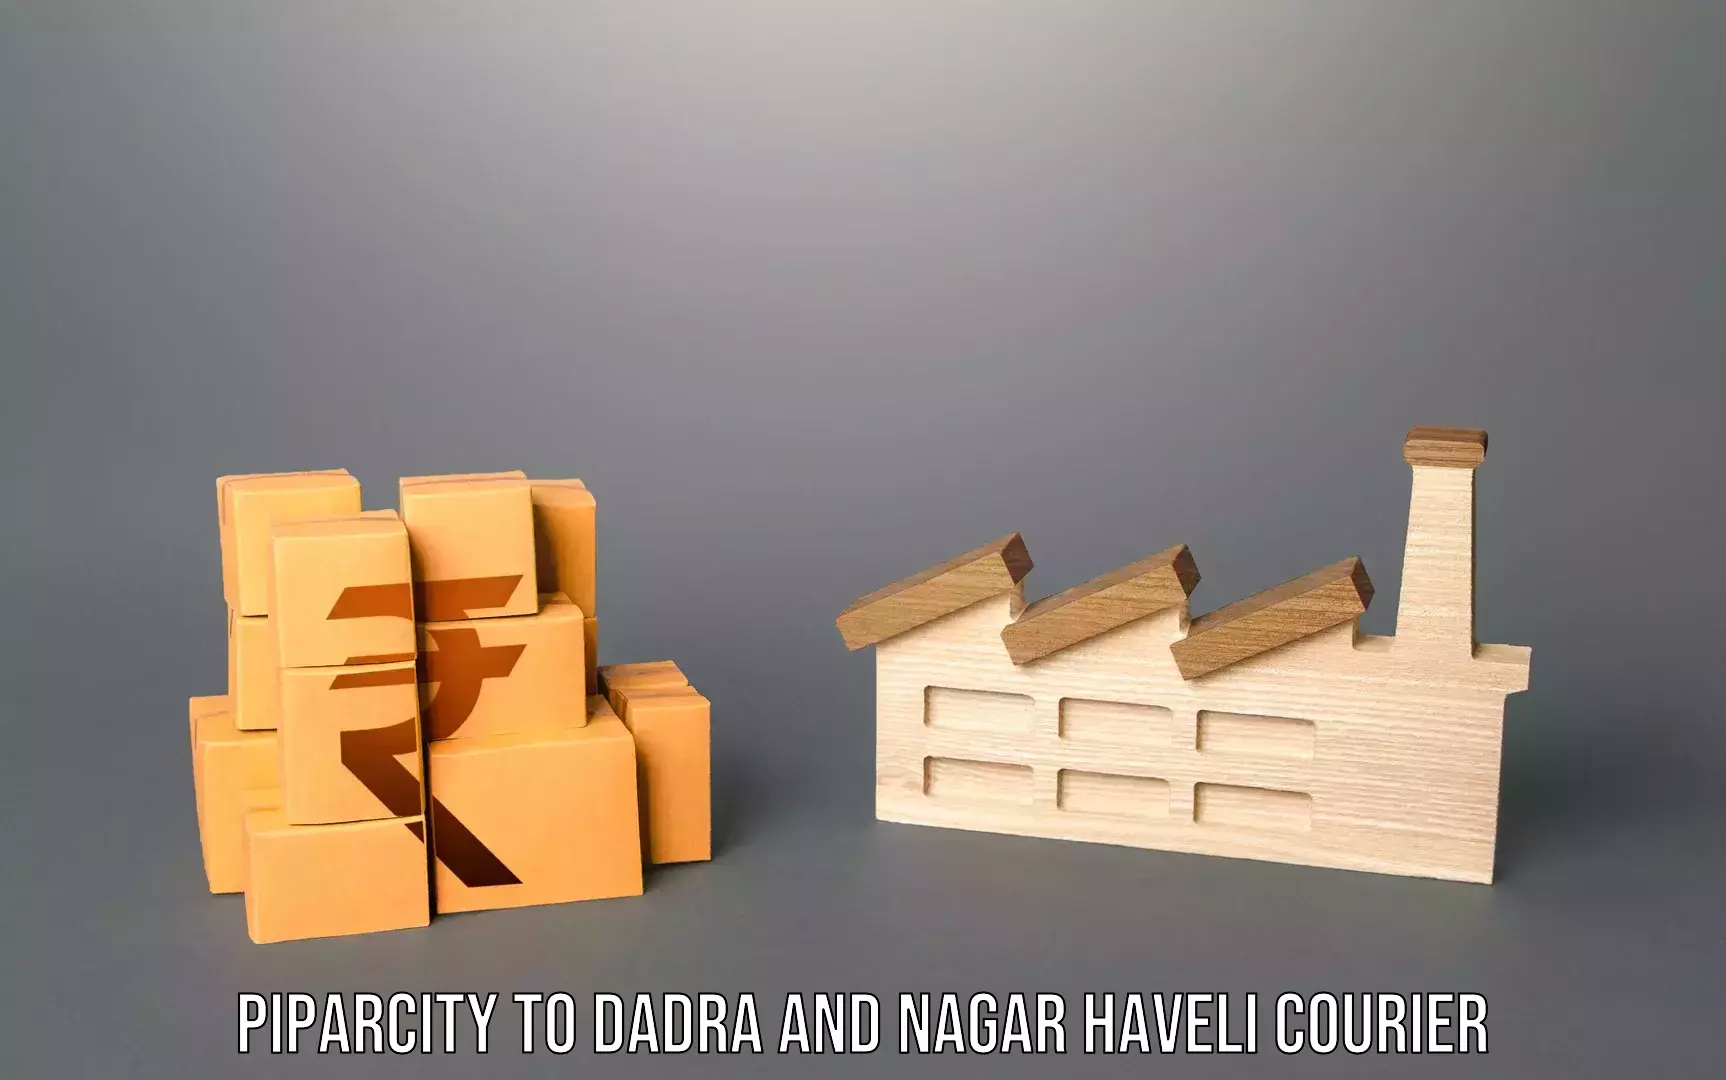 Doorstep luggage collection Piparcity to Dadra and Nagar Haveli